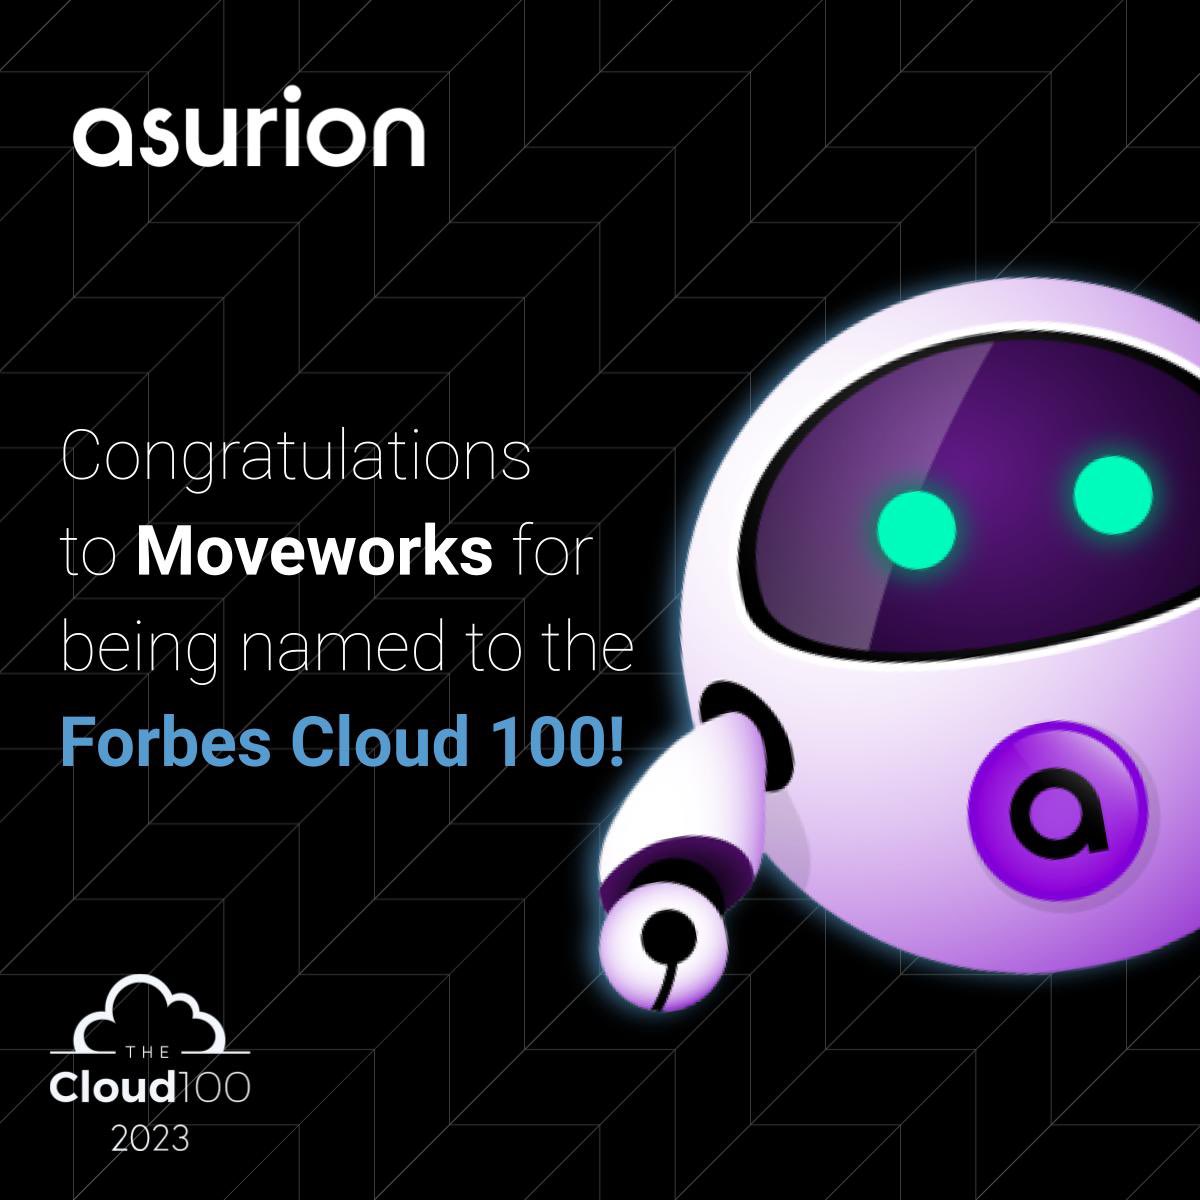 Congratulations to Moveworks for making this year’s Forbes Cloud 100 list! Having been a two-time Moveworks customer, I’ve witnessed their evolution first hand. It’s exciting to see the Moveworks team learning recognition on a global scale. Looking forward to what’s next!